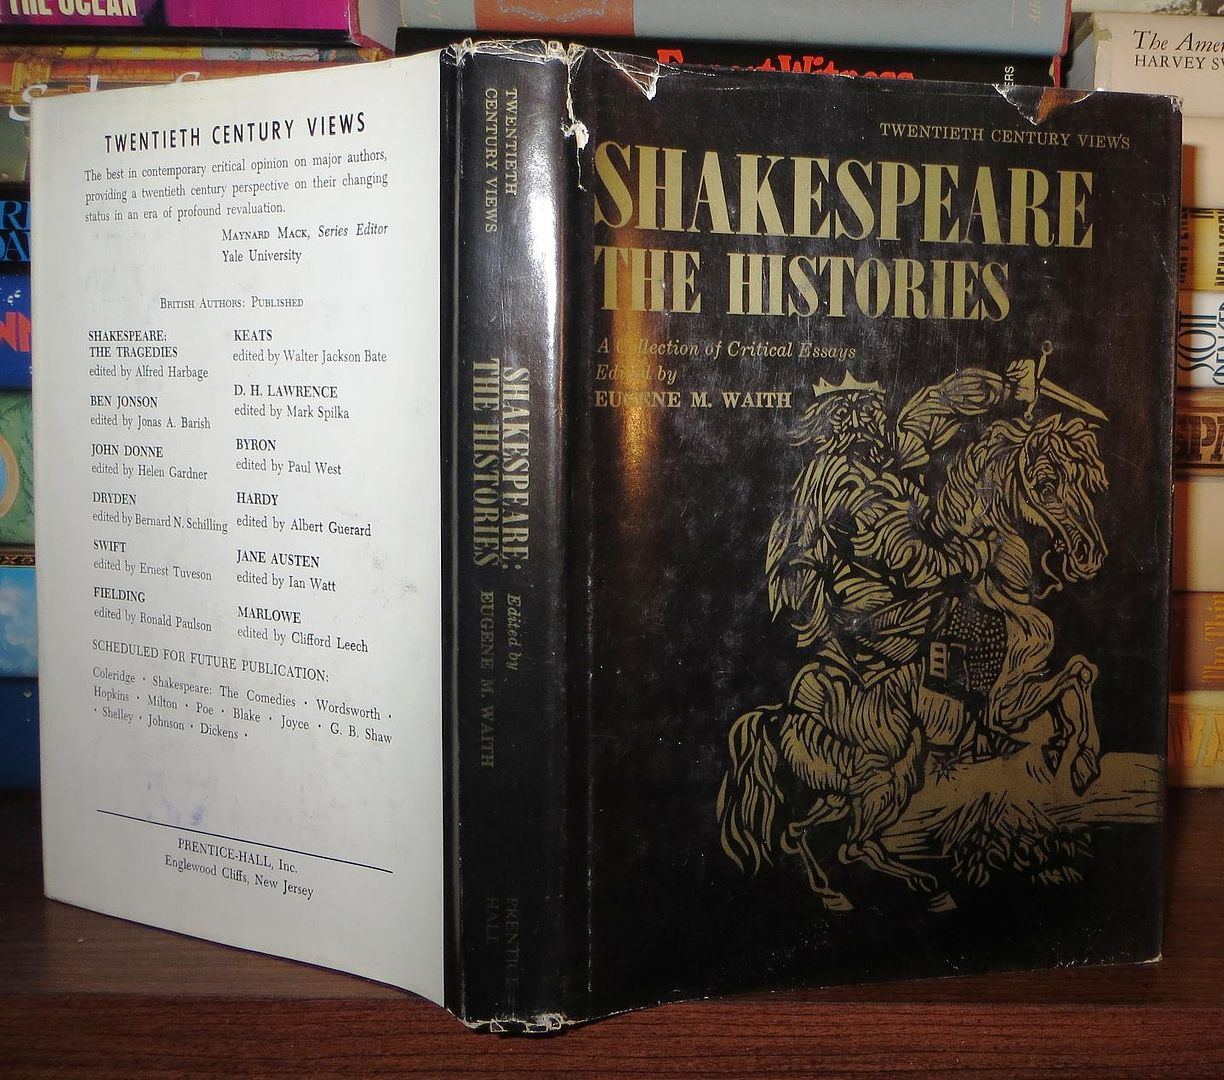 WAITH, EUGENE M. - Shakespeare the Histories a Collection of Critical Essays